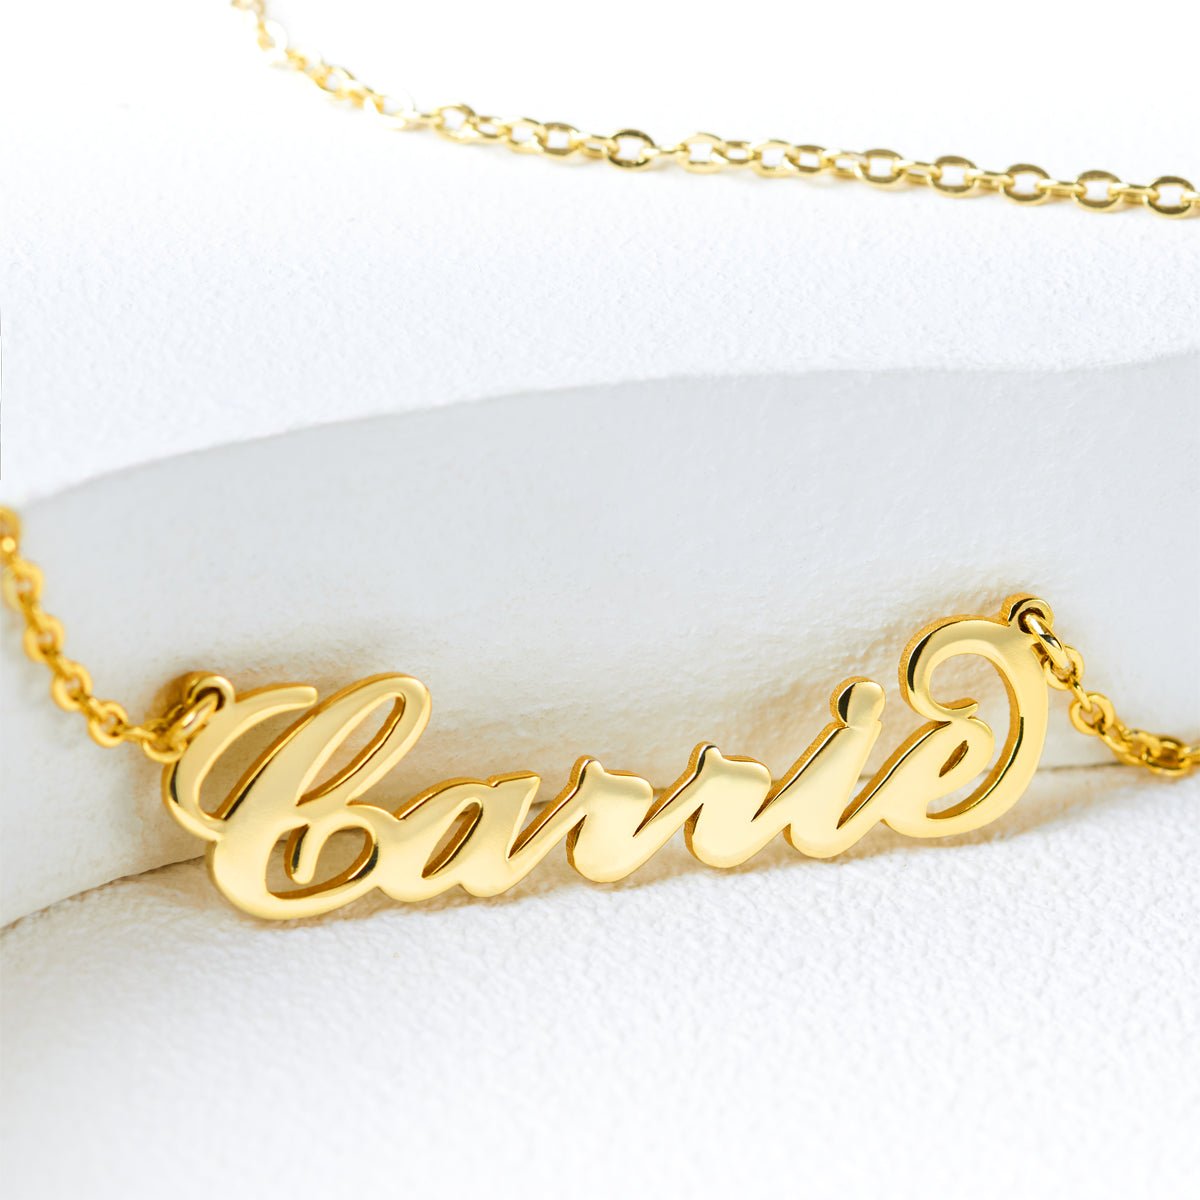 Rose "Carrie" Style Name Necklace Gift for Her - glwave